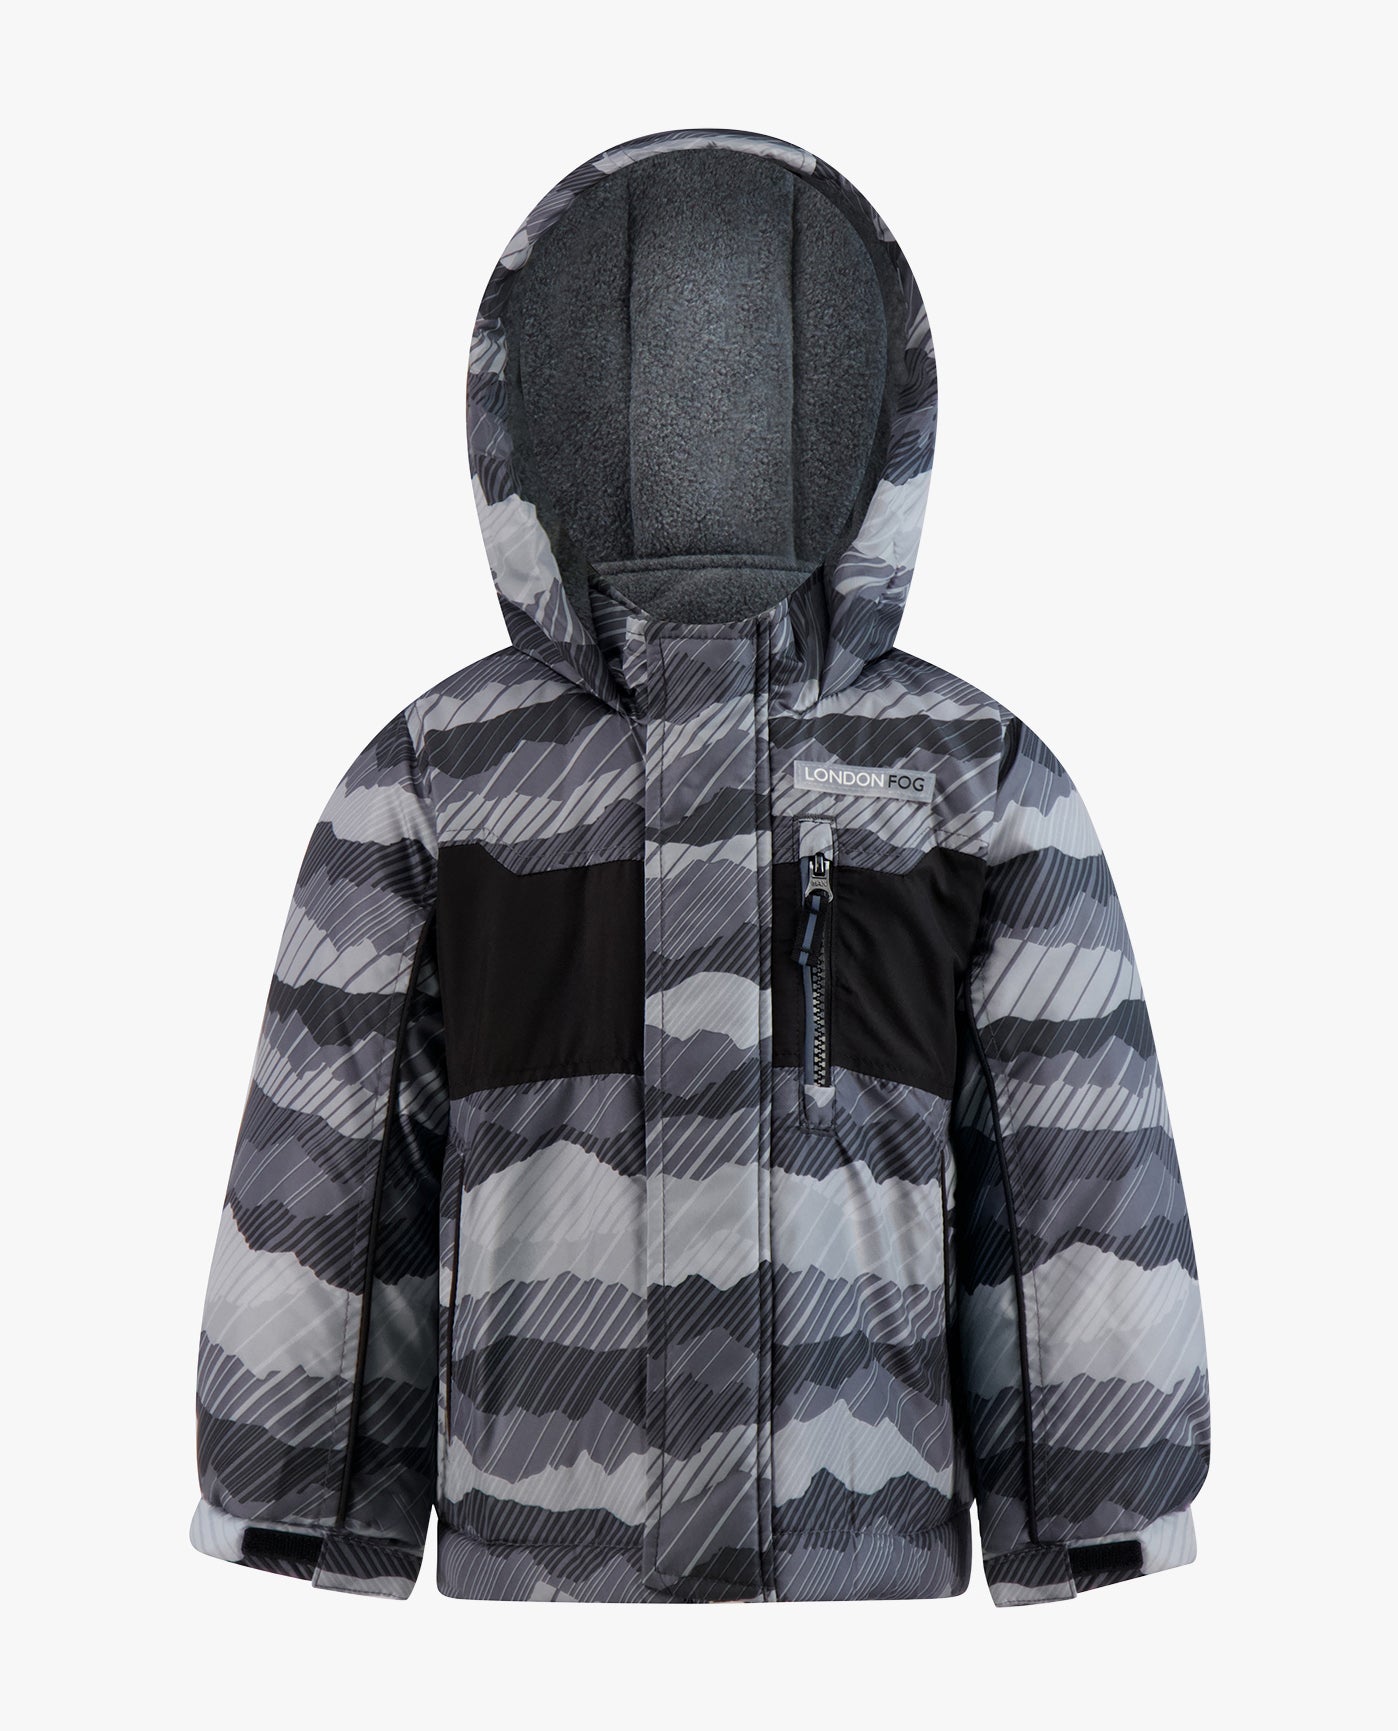 FRONT VIEW OF TODDLER BOYS ZIP-FRONT HOODED JACKET WITH OVERALL SNOW PANT | GREY PRINT